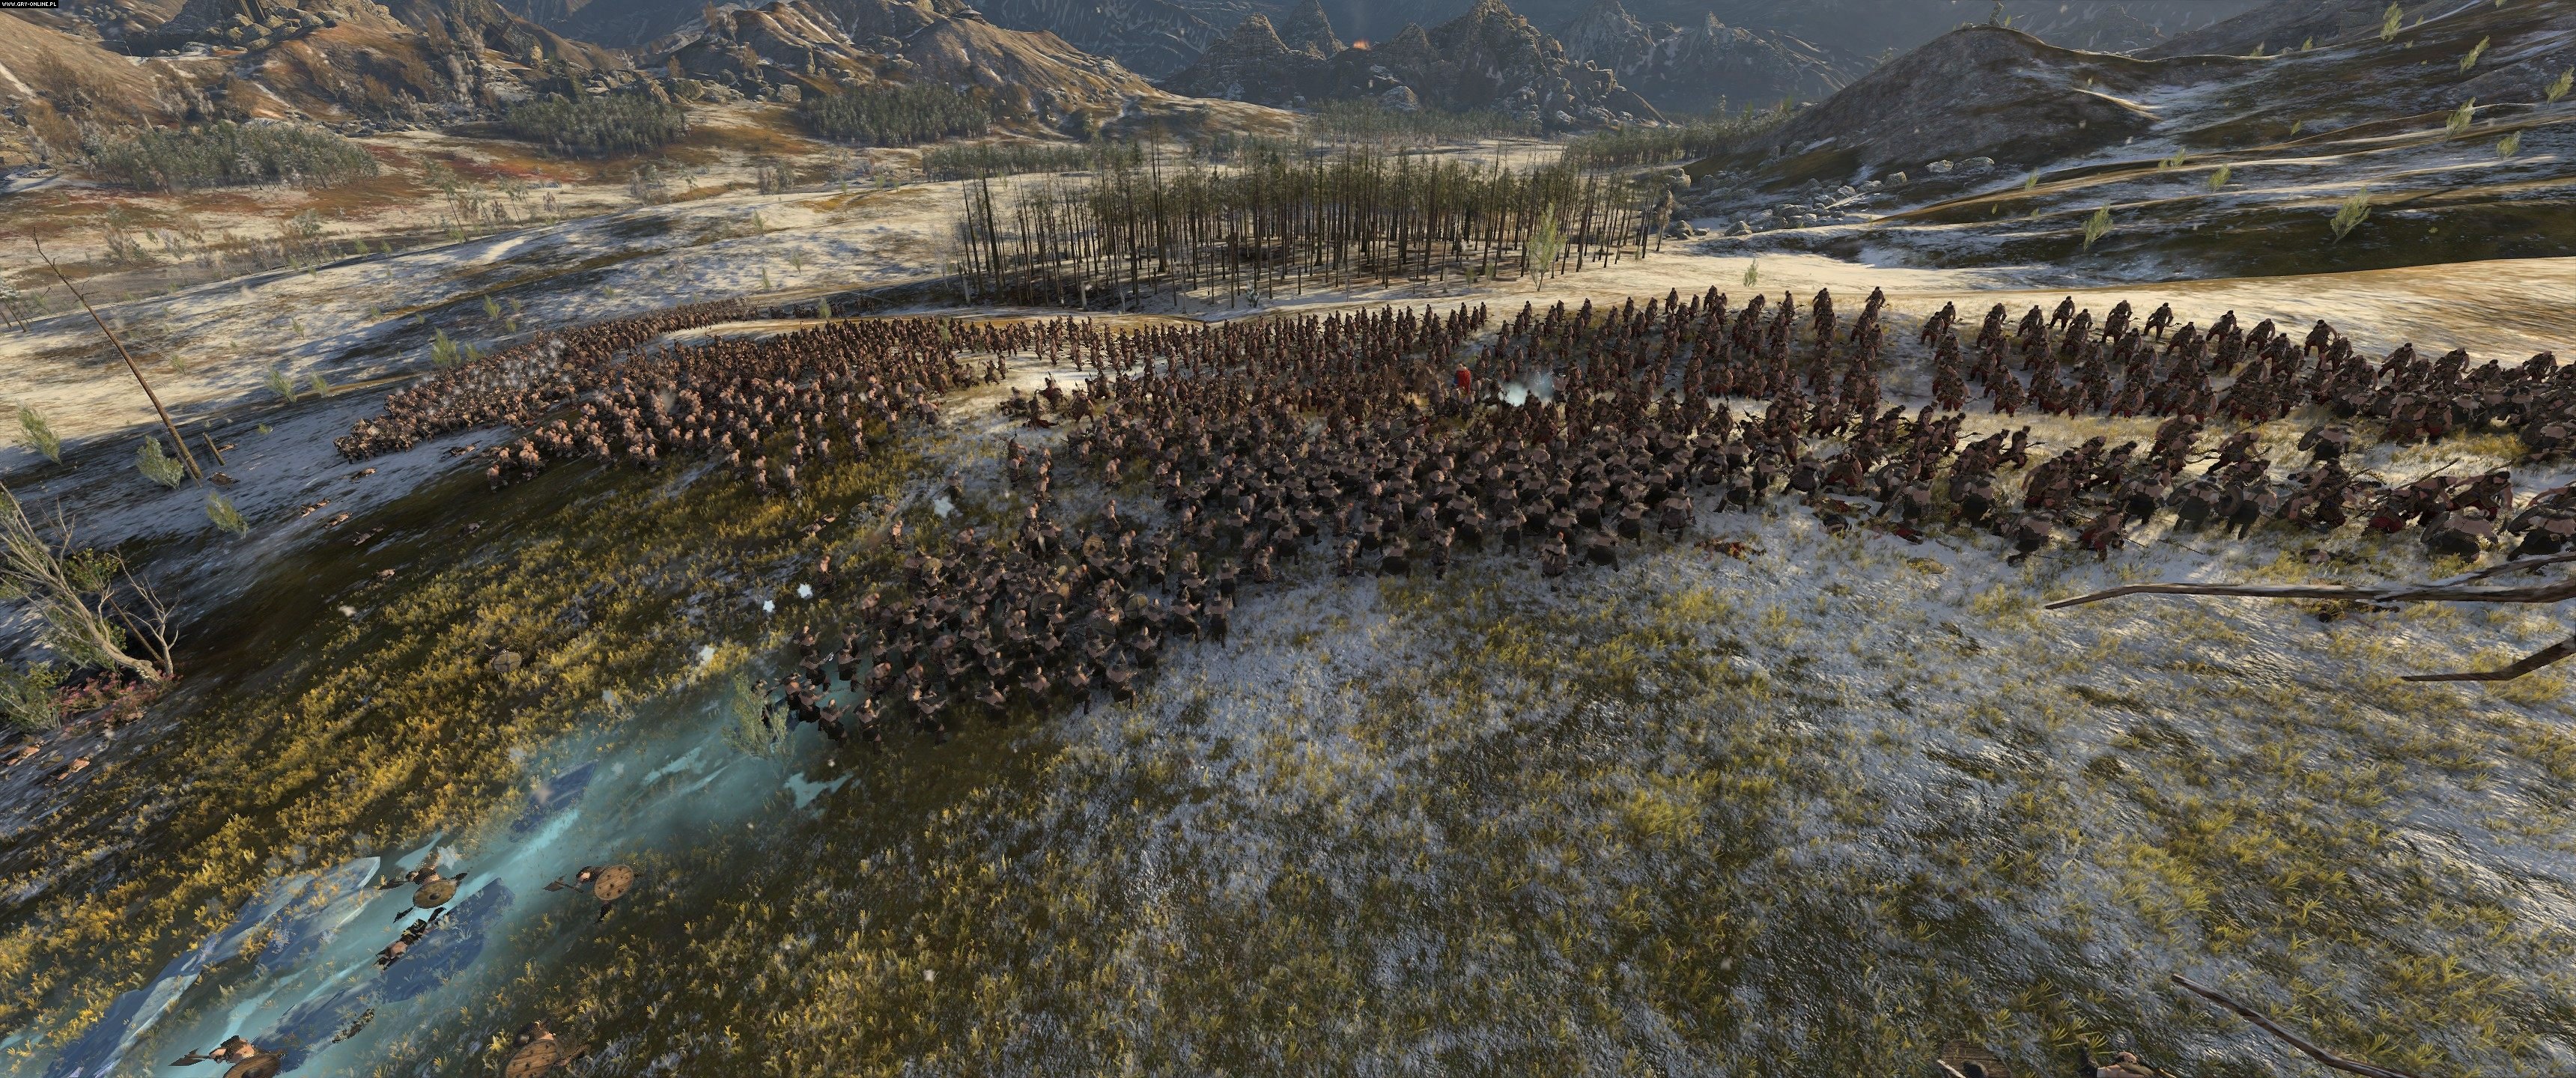 Total War: Warhammer 3 makes up for the absence of the best LOTR